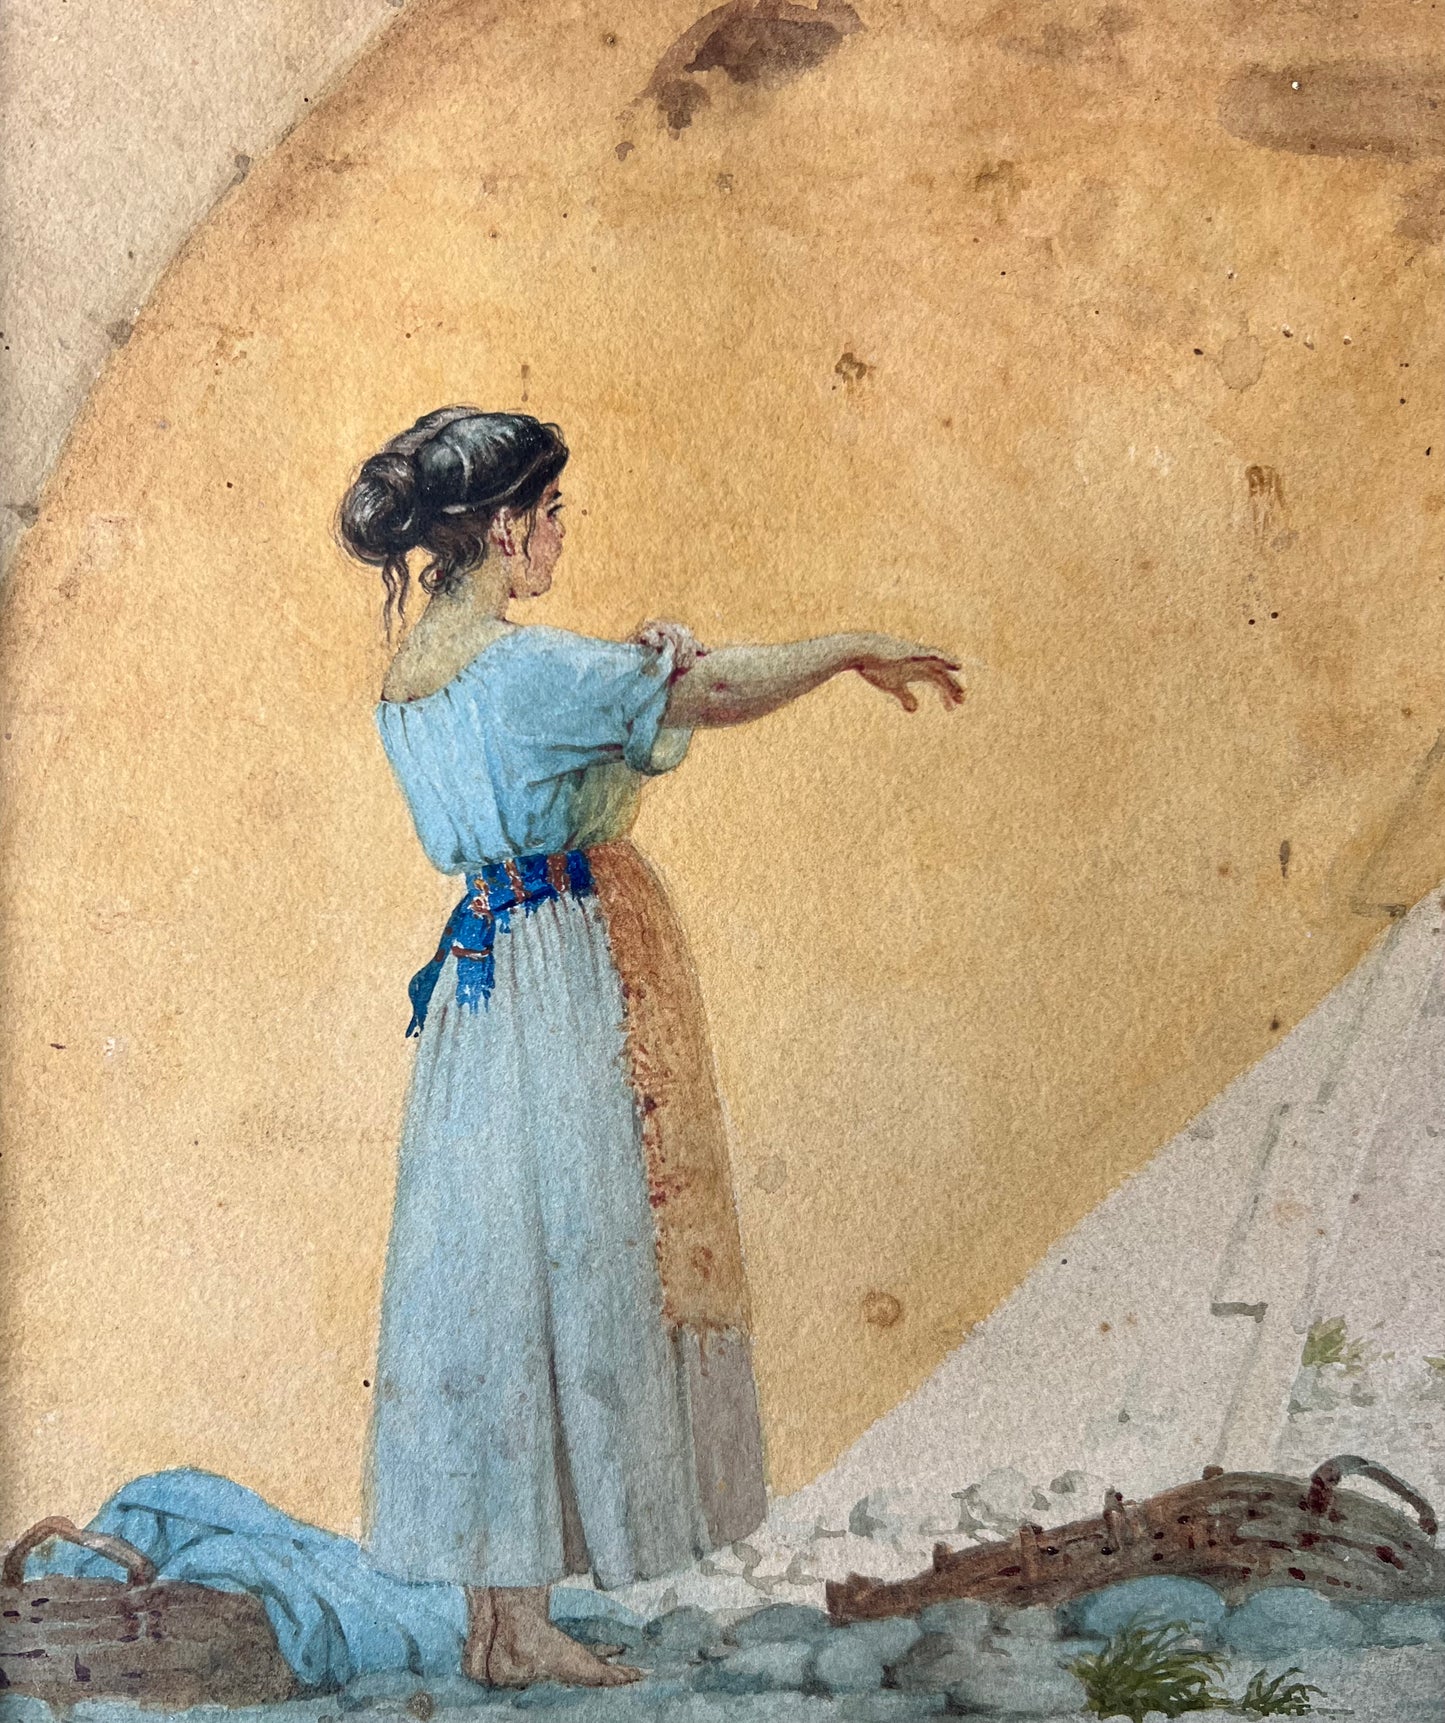 Unknown artist. A laundry woman by the river, 19th century